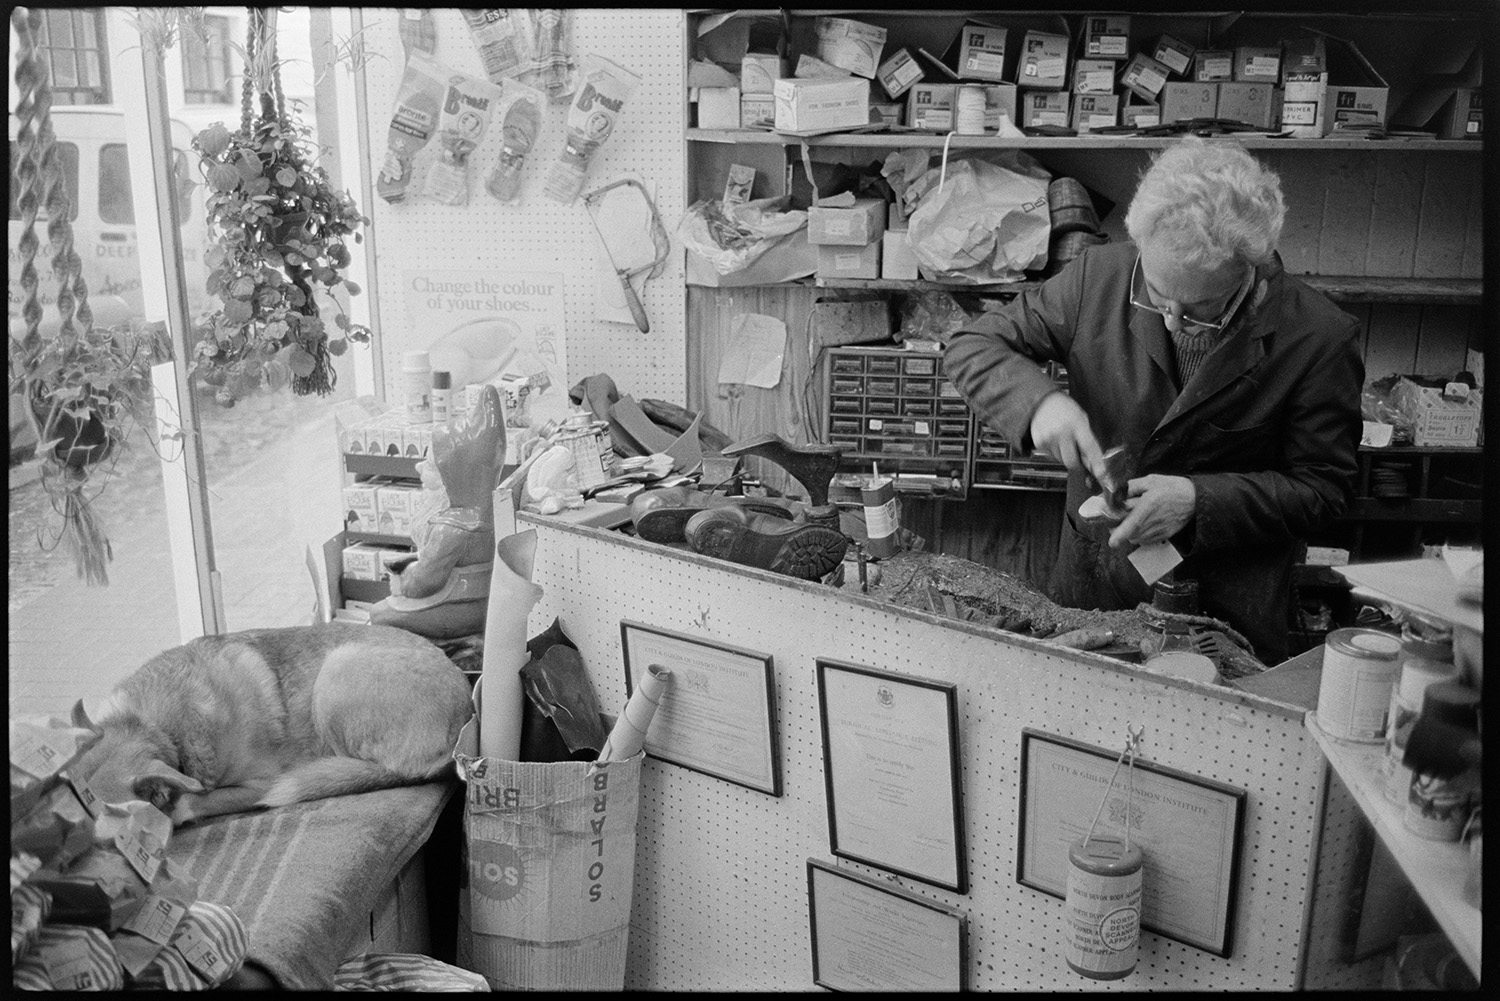 Man and woman shoemakers working in shoe repair shop. 
[Ray Gale repairing a shoe in his shoe repair shop in Boutport Street, Barnstaple. A dog is lying in the shop window on a bench below a hanging pot plant and bunch of honesty.  Certificates are hung up on the shop counter and shoe boxes can be seen in the background.]